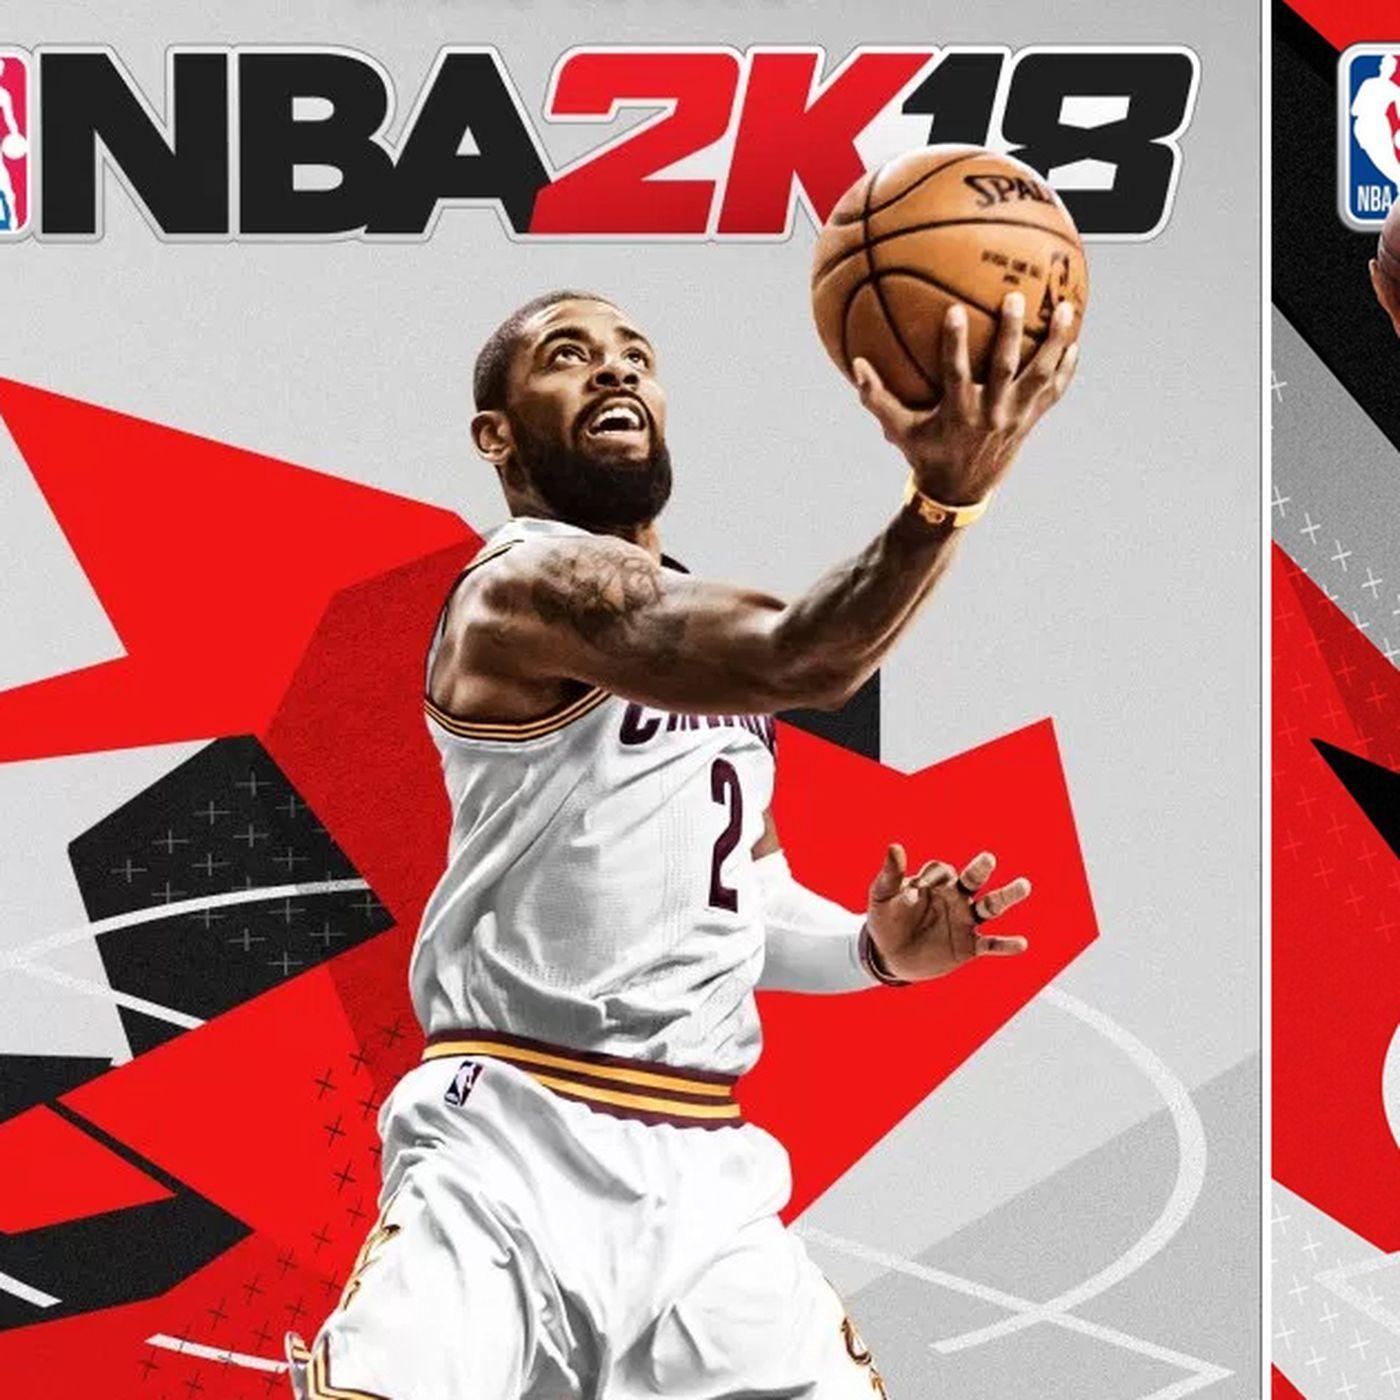 Red Basketball Player Logo - Here's everything you need to know about 'NBA 2K18' - SBNation.com